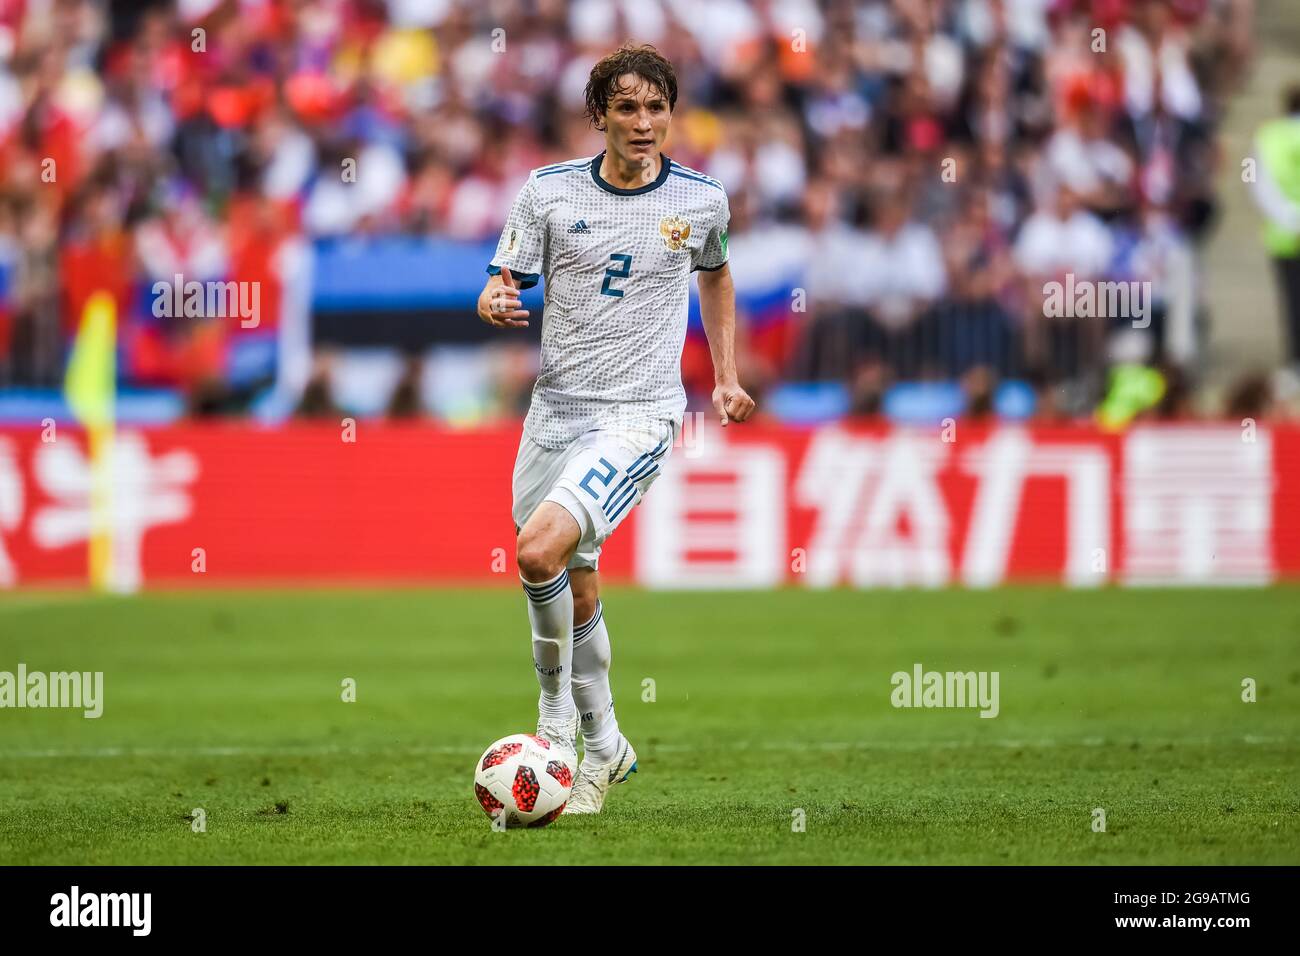 Moscow, Russia - July 1, 2018. Russia national football team defender Mario Fernandes during FIFA World Cup 2018 Round of 16 match Spain vs Russia. Stock Photo